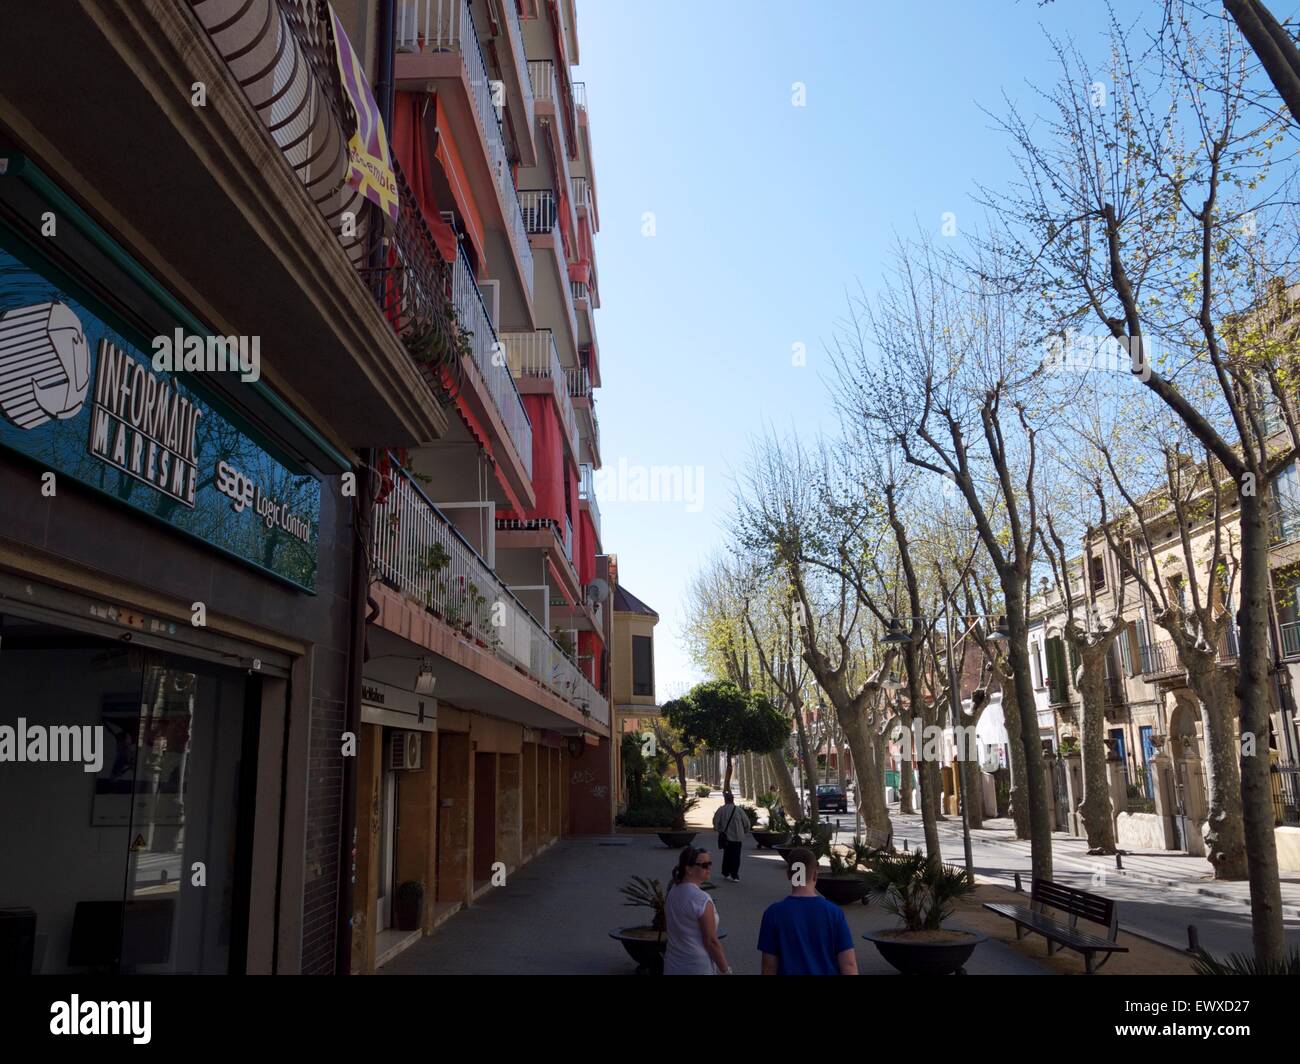 Typical shopping street in Spain Stock Photo